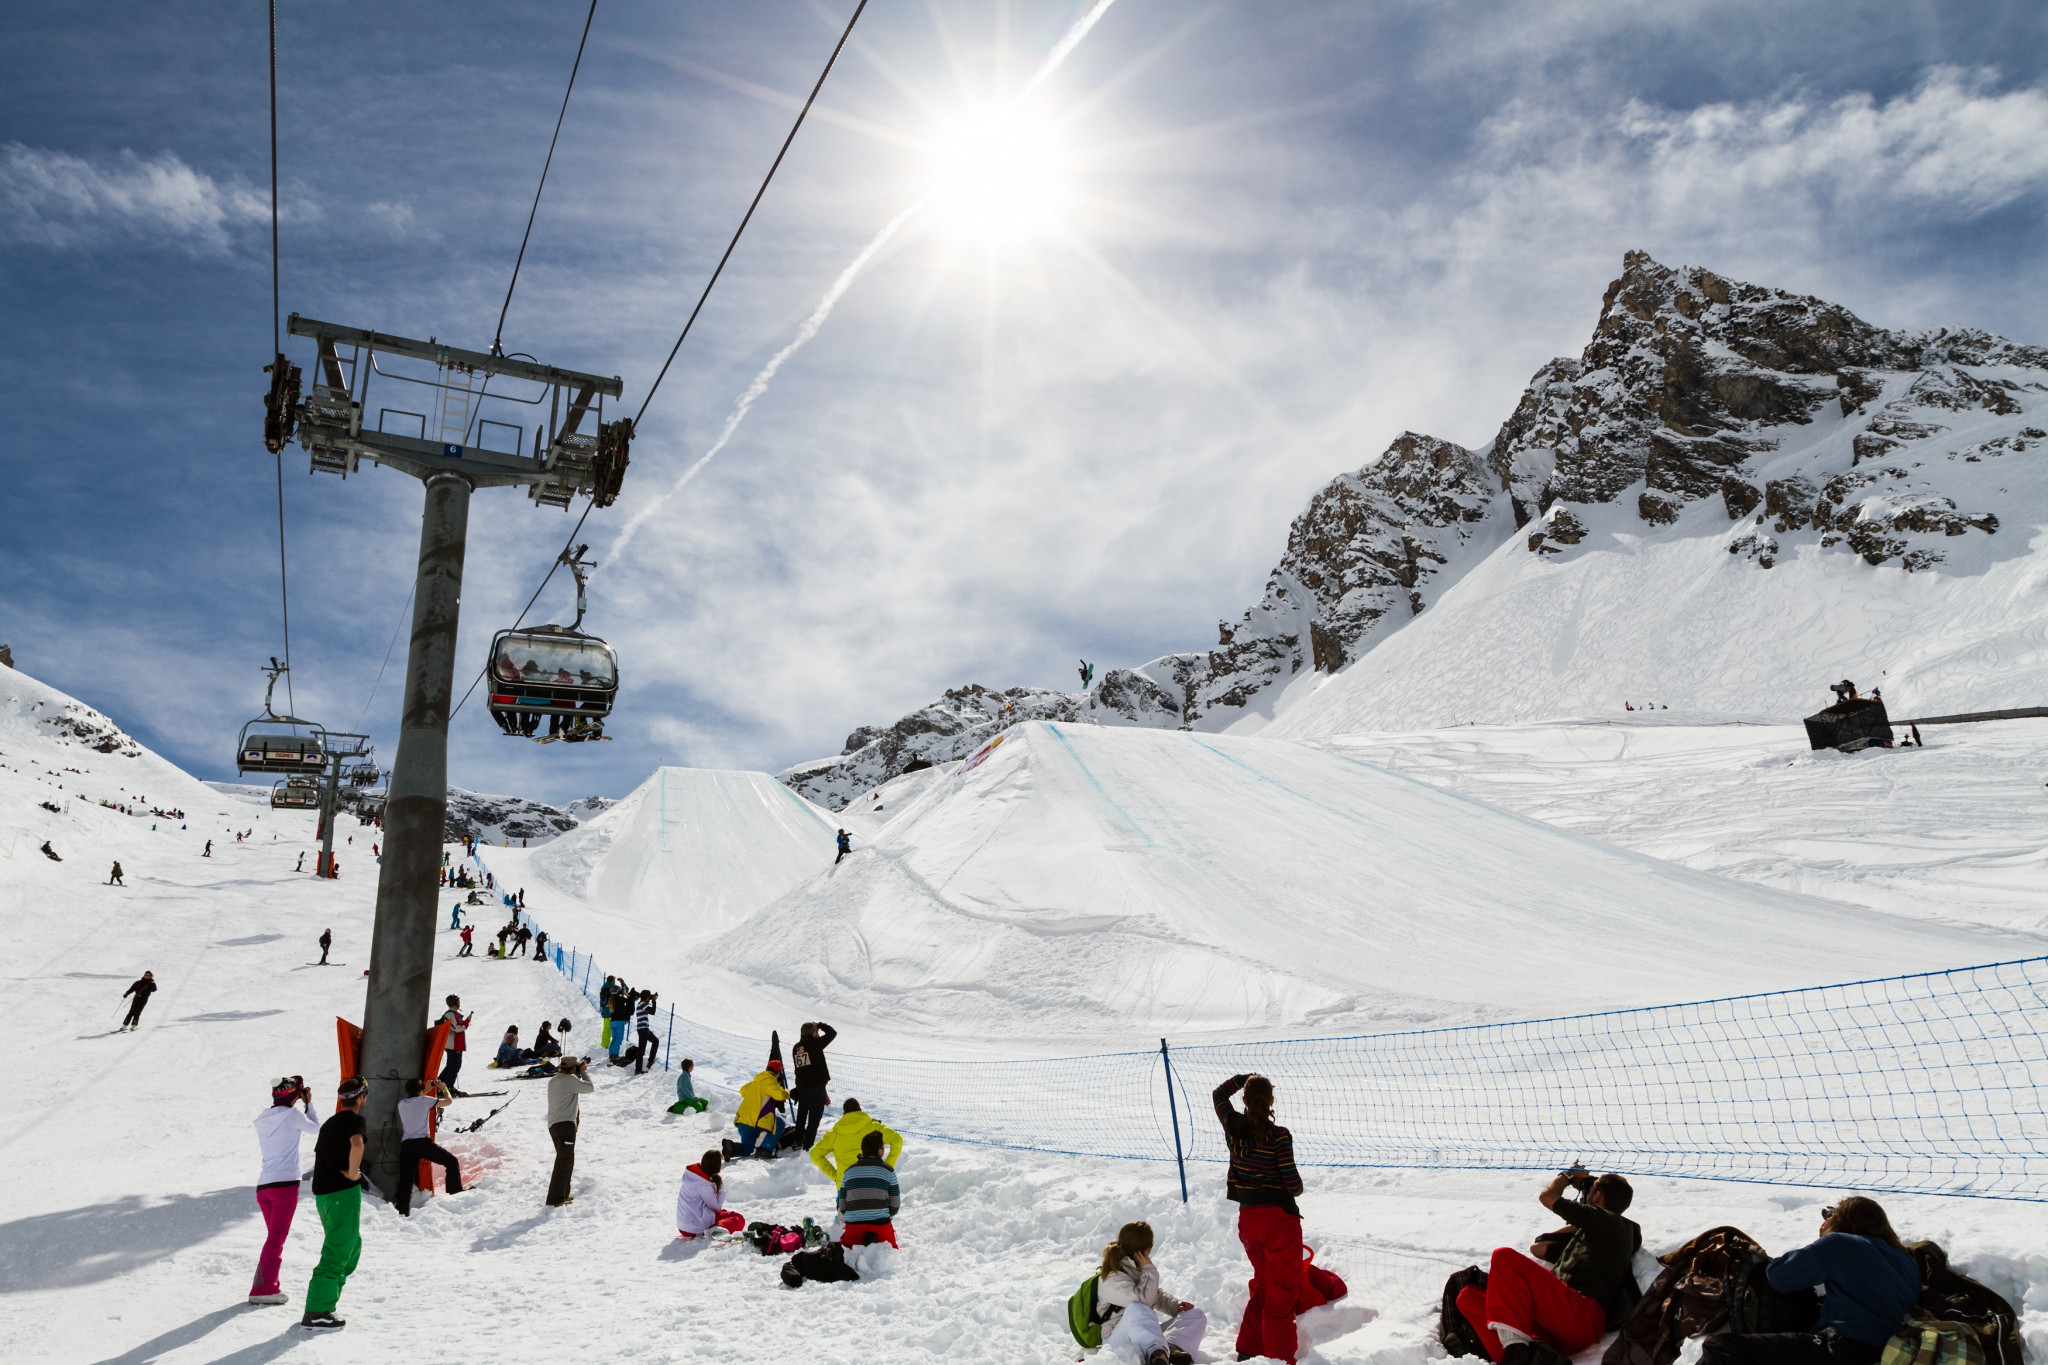 Tignes is due to stage the stage the men's and women's slopestyle finals tomorrow ©Getty Images